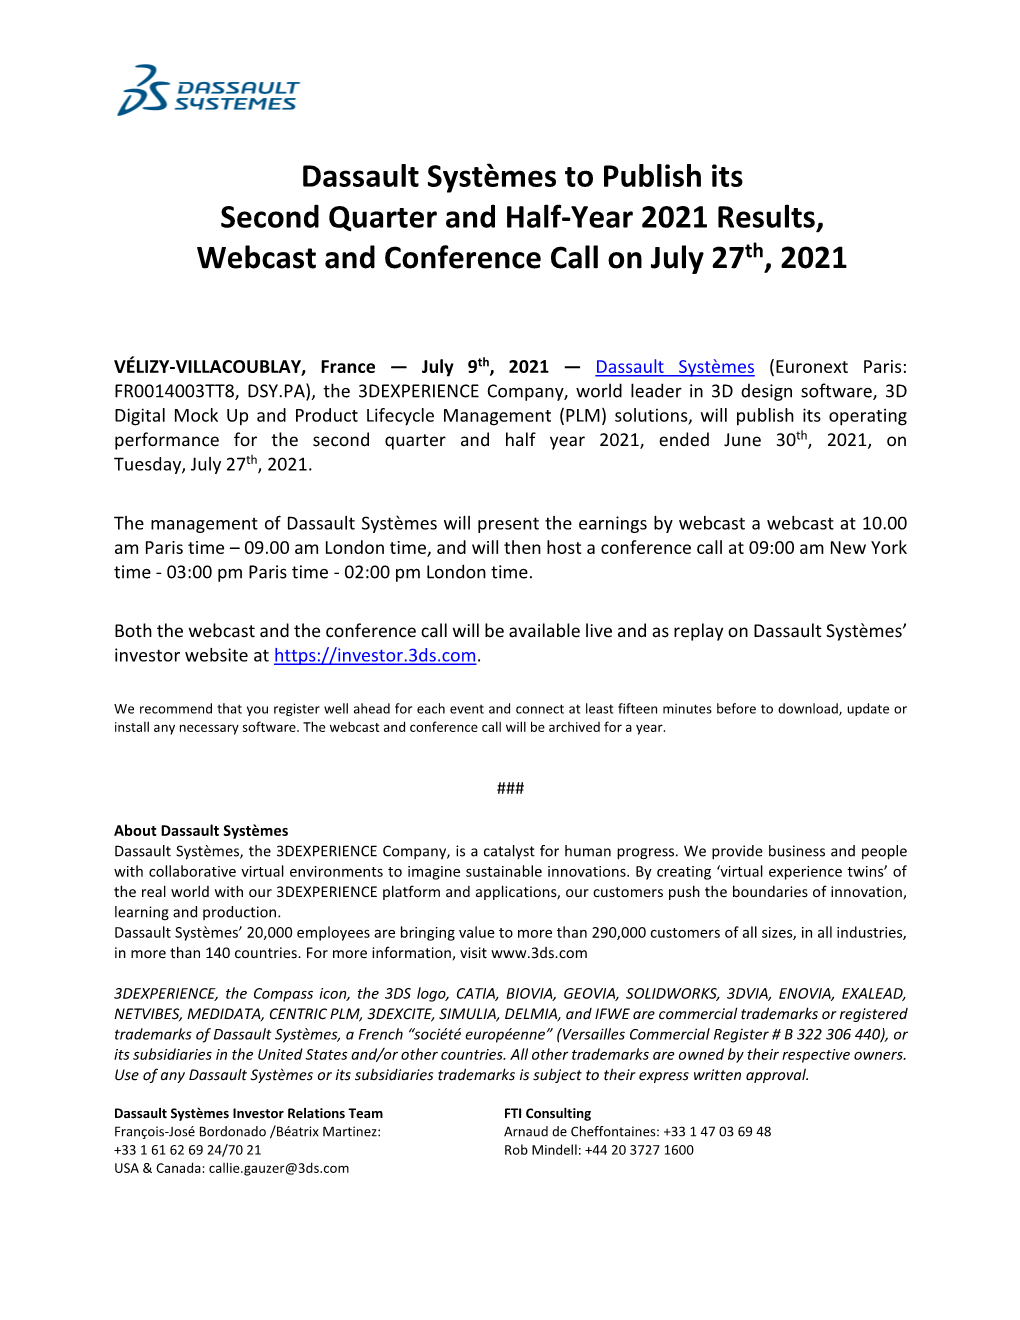 Dassault Systèmes to Publish Its Second Quarter and Half-Year 2021 Results, Webcast and Conference Call on July 27Th, 2021